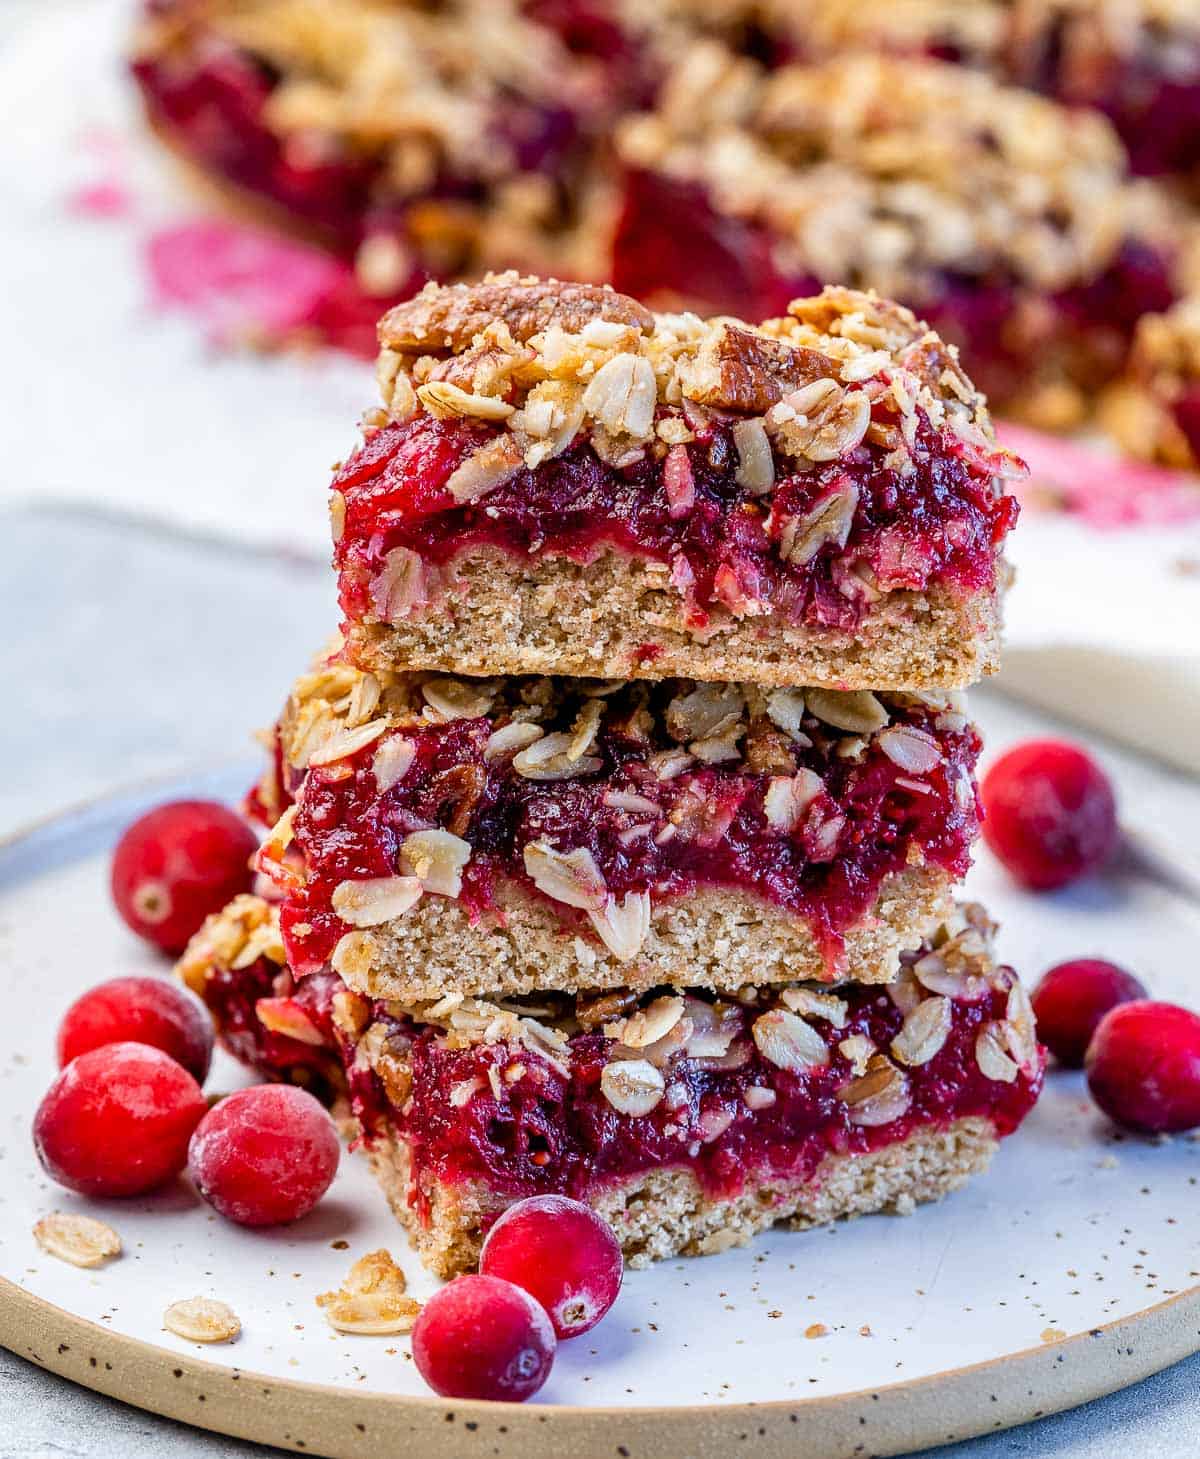 Cranberry oatmeal bars stacked on a plate with fresh cranberries on the side.